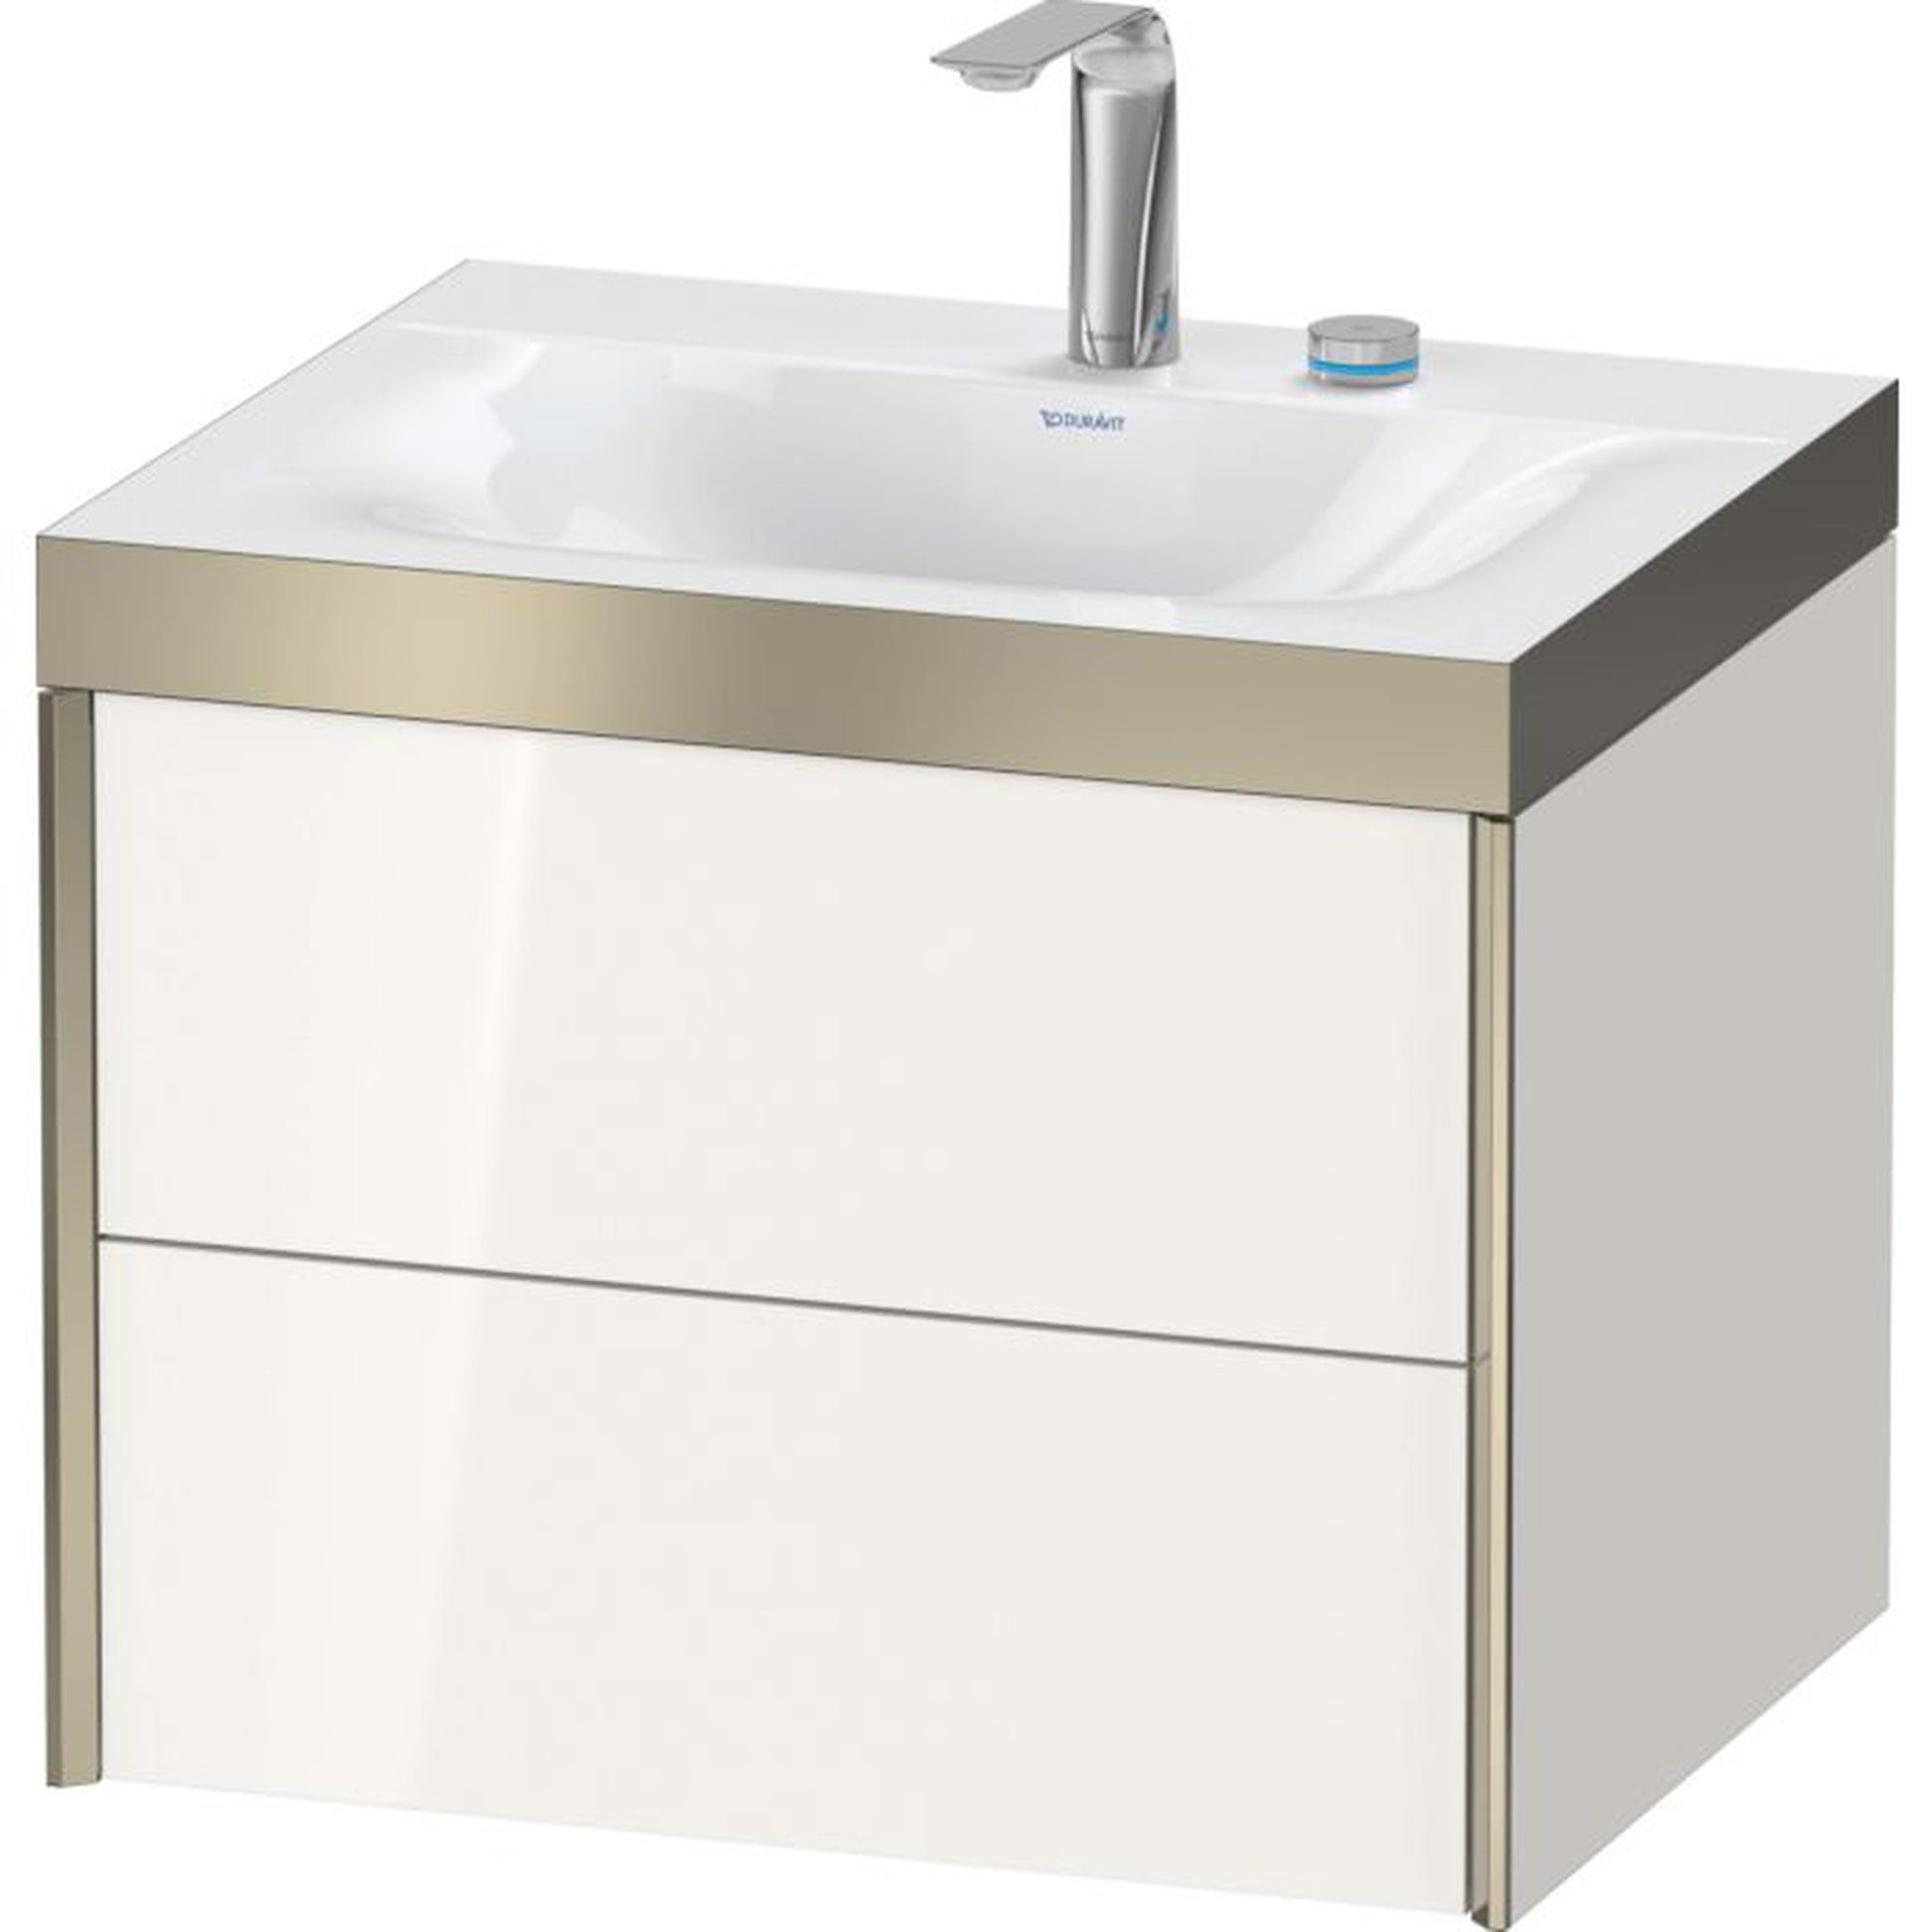 Duravit Xviu 24" x 20" x 19" Two Drawer C-Bonded Wall-Mount Vanity Kit With Two Tap Holes, White (XV4614EB122P)